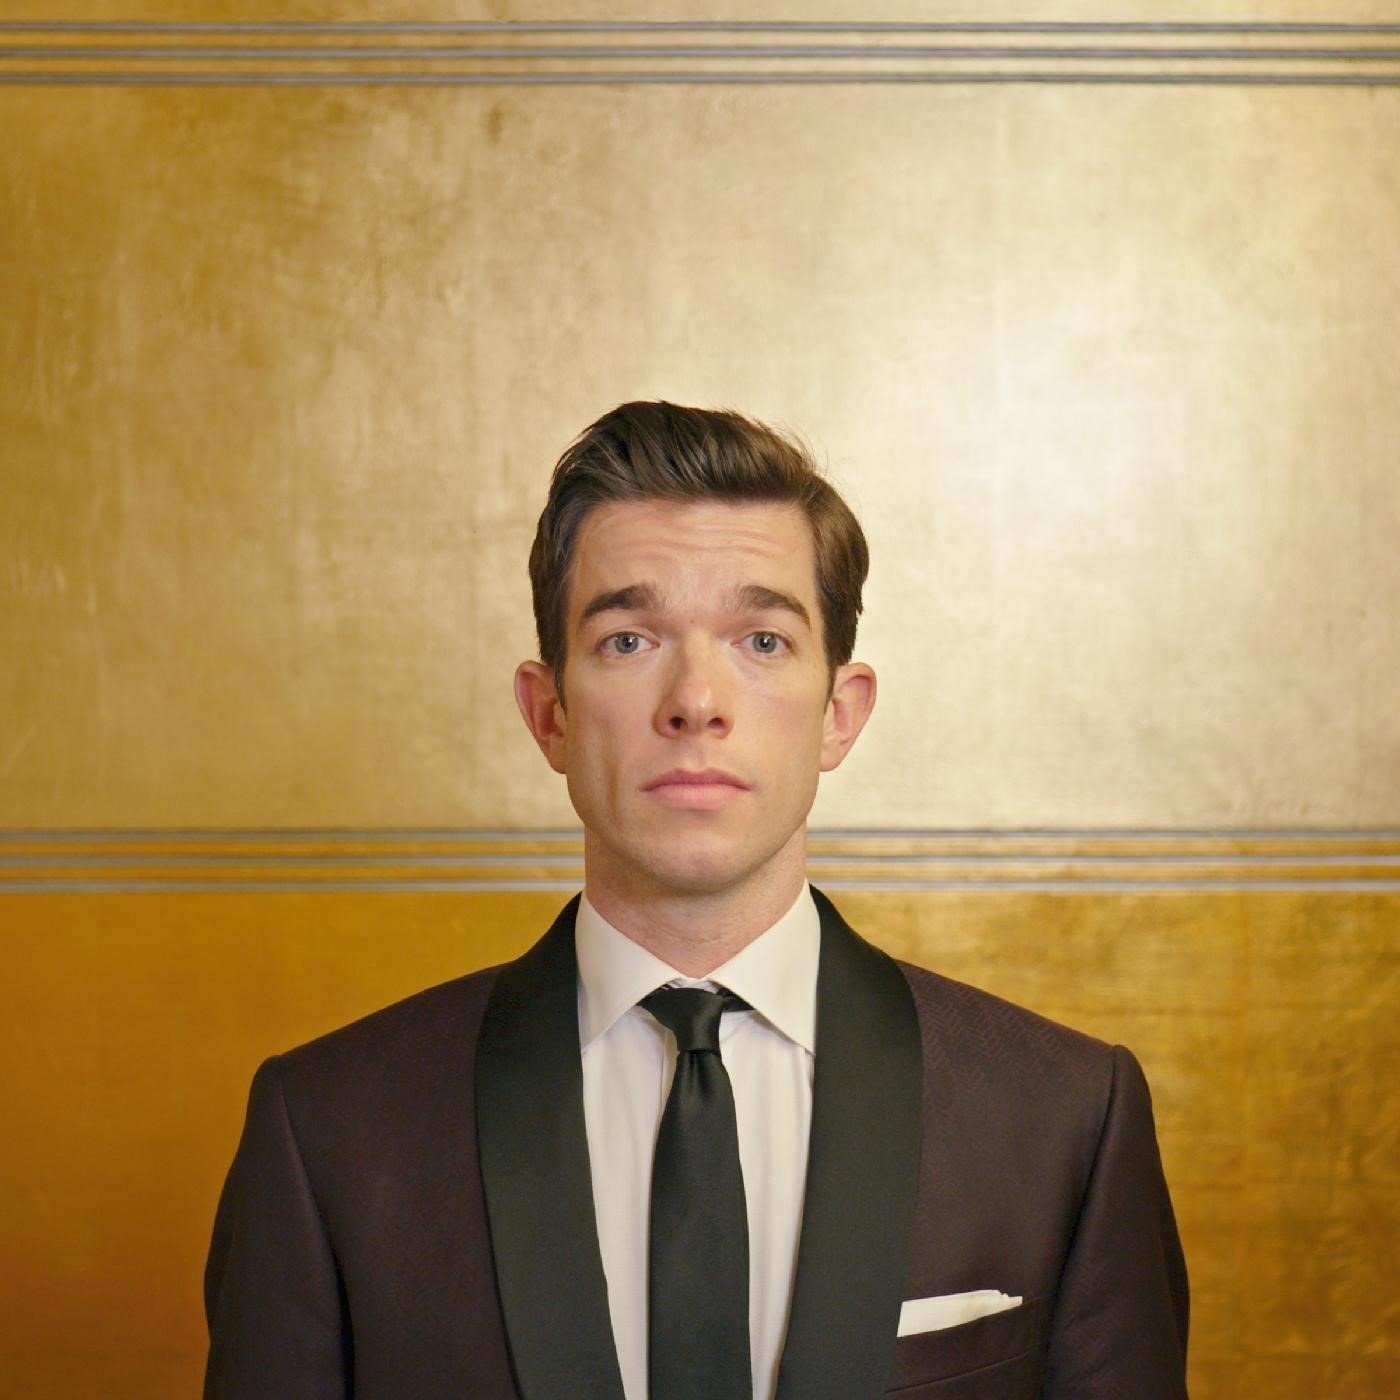 Kid Gorgeous at Radio City is the album on Vinyl of the Netflix concert film I did which was the culmination of a 150 date stand-up comedy tour called John Mulaney Kid Gorgeous.